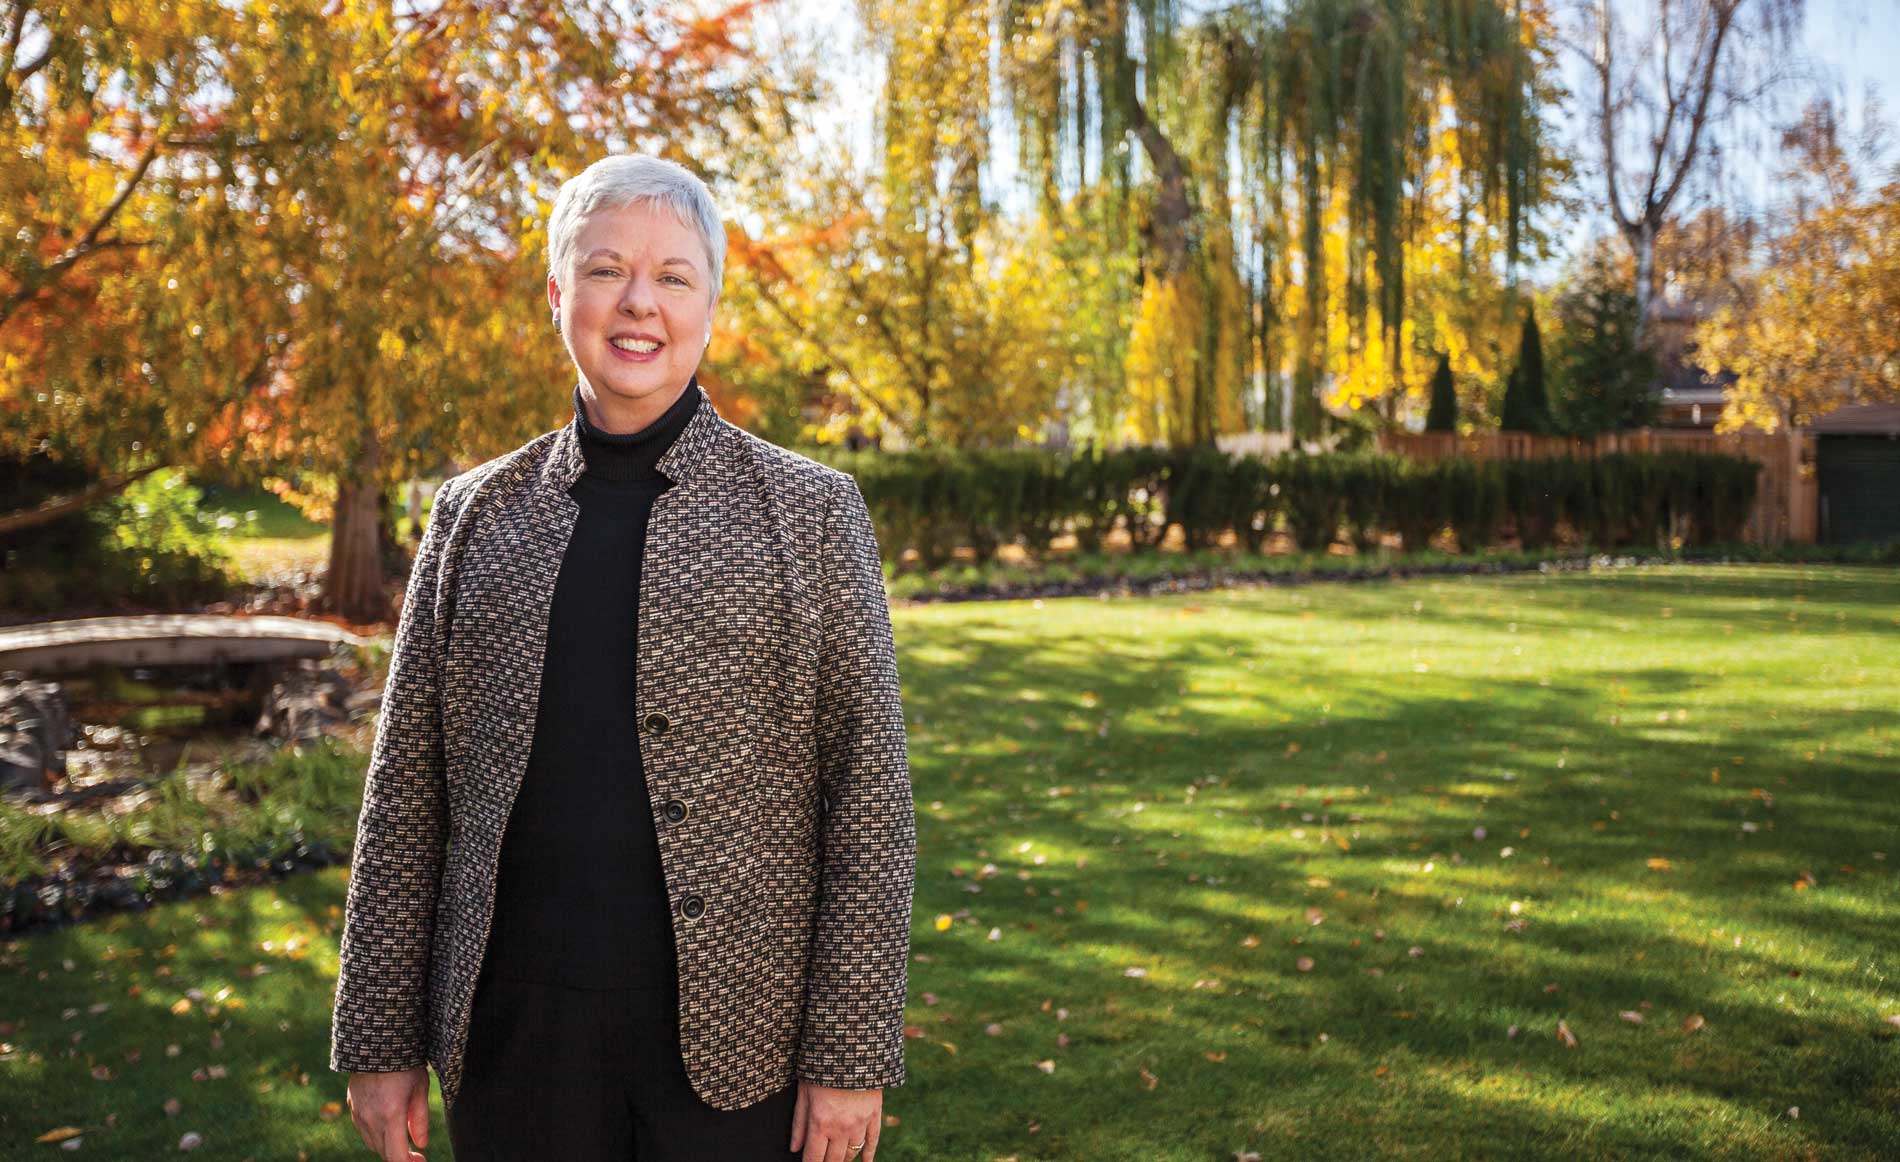 Whitman College president Kathy Murray standing outside with fall colors in the background.